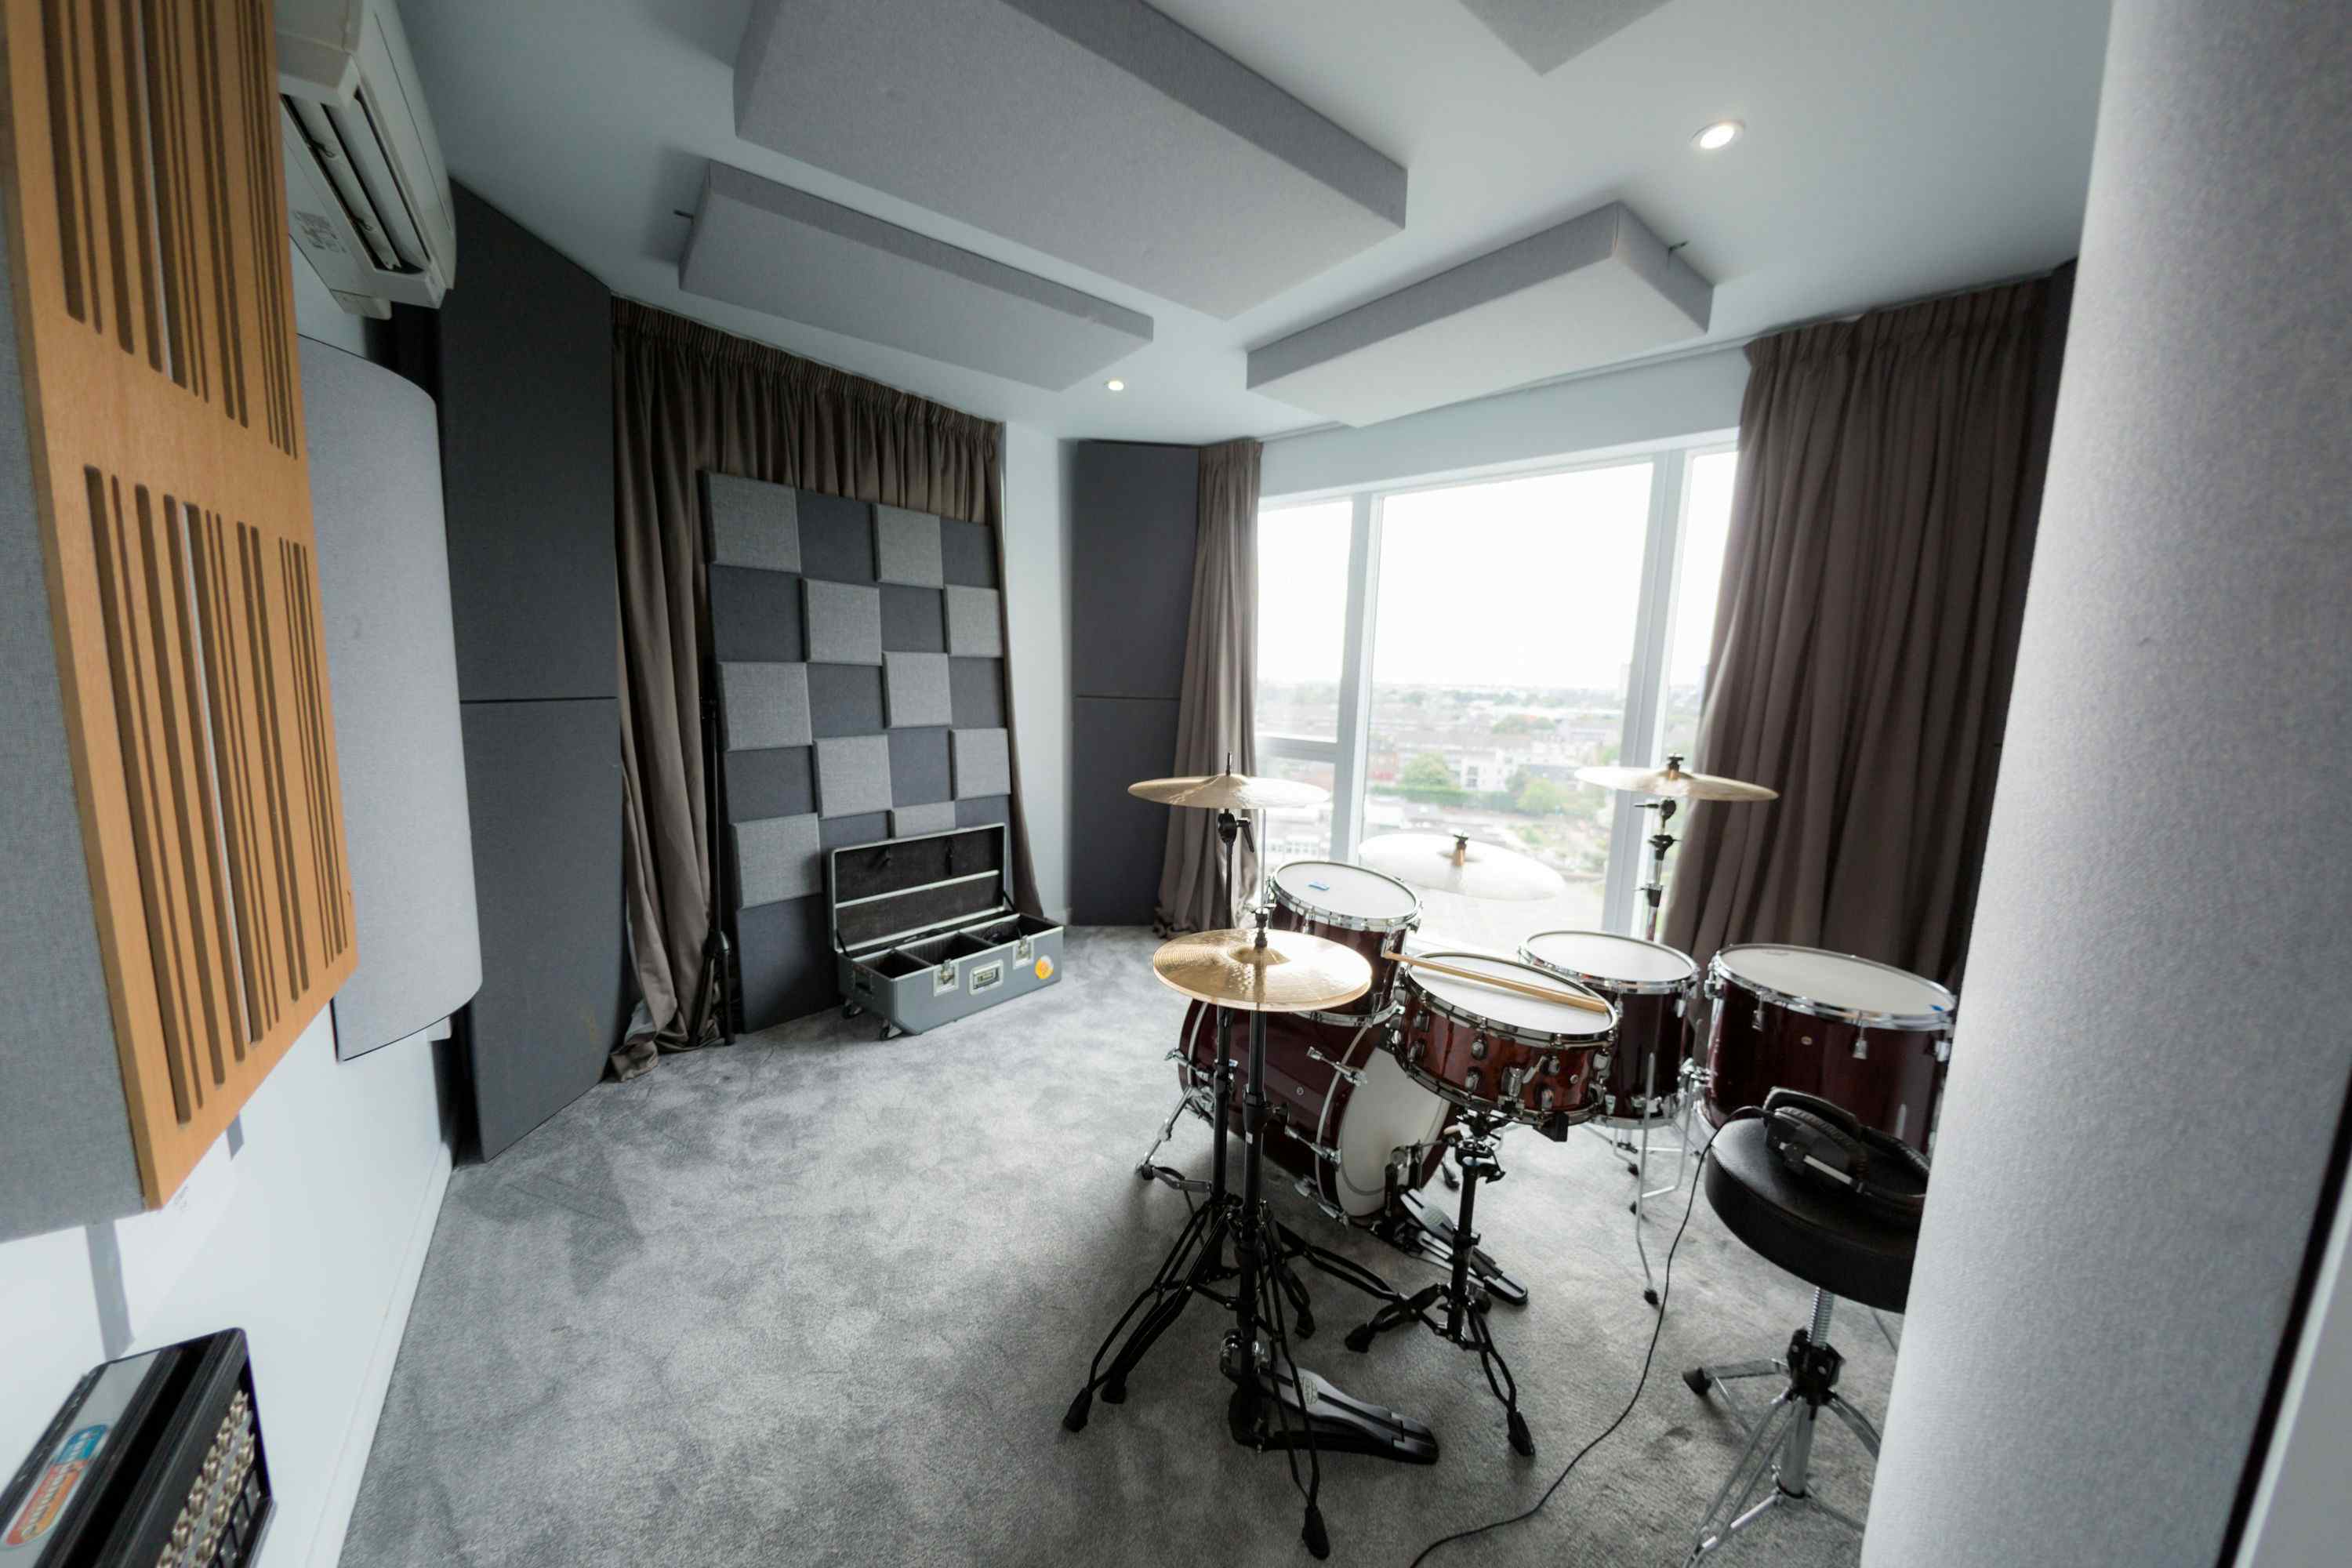 Stunning Penthouse Recording Studio in West London, SkyTop Productions